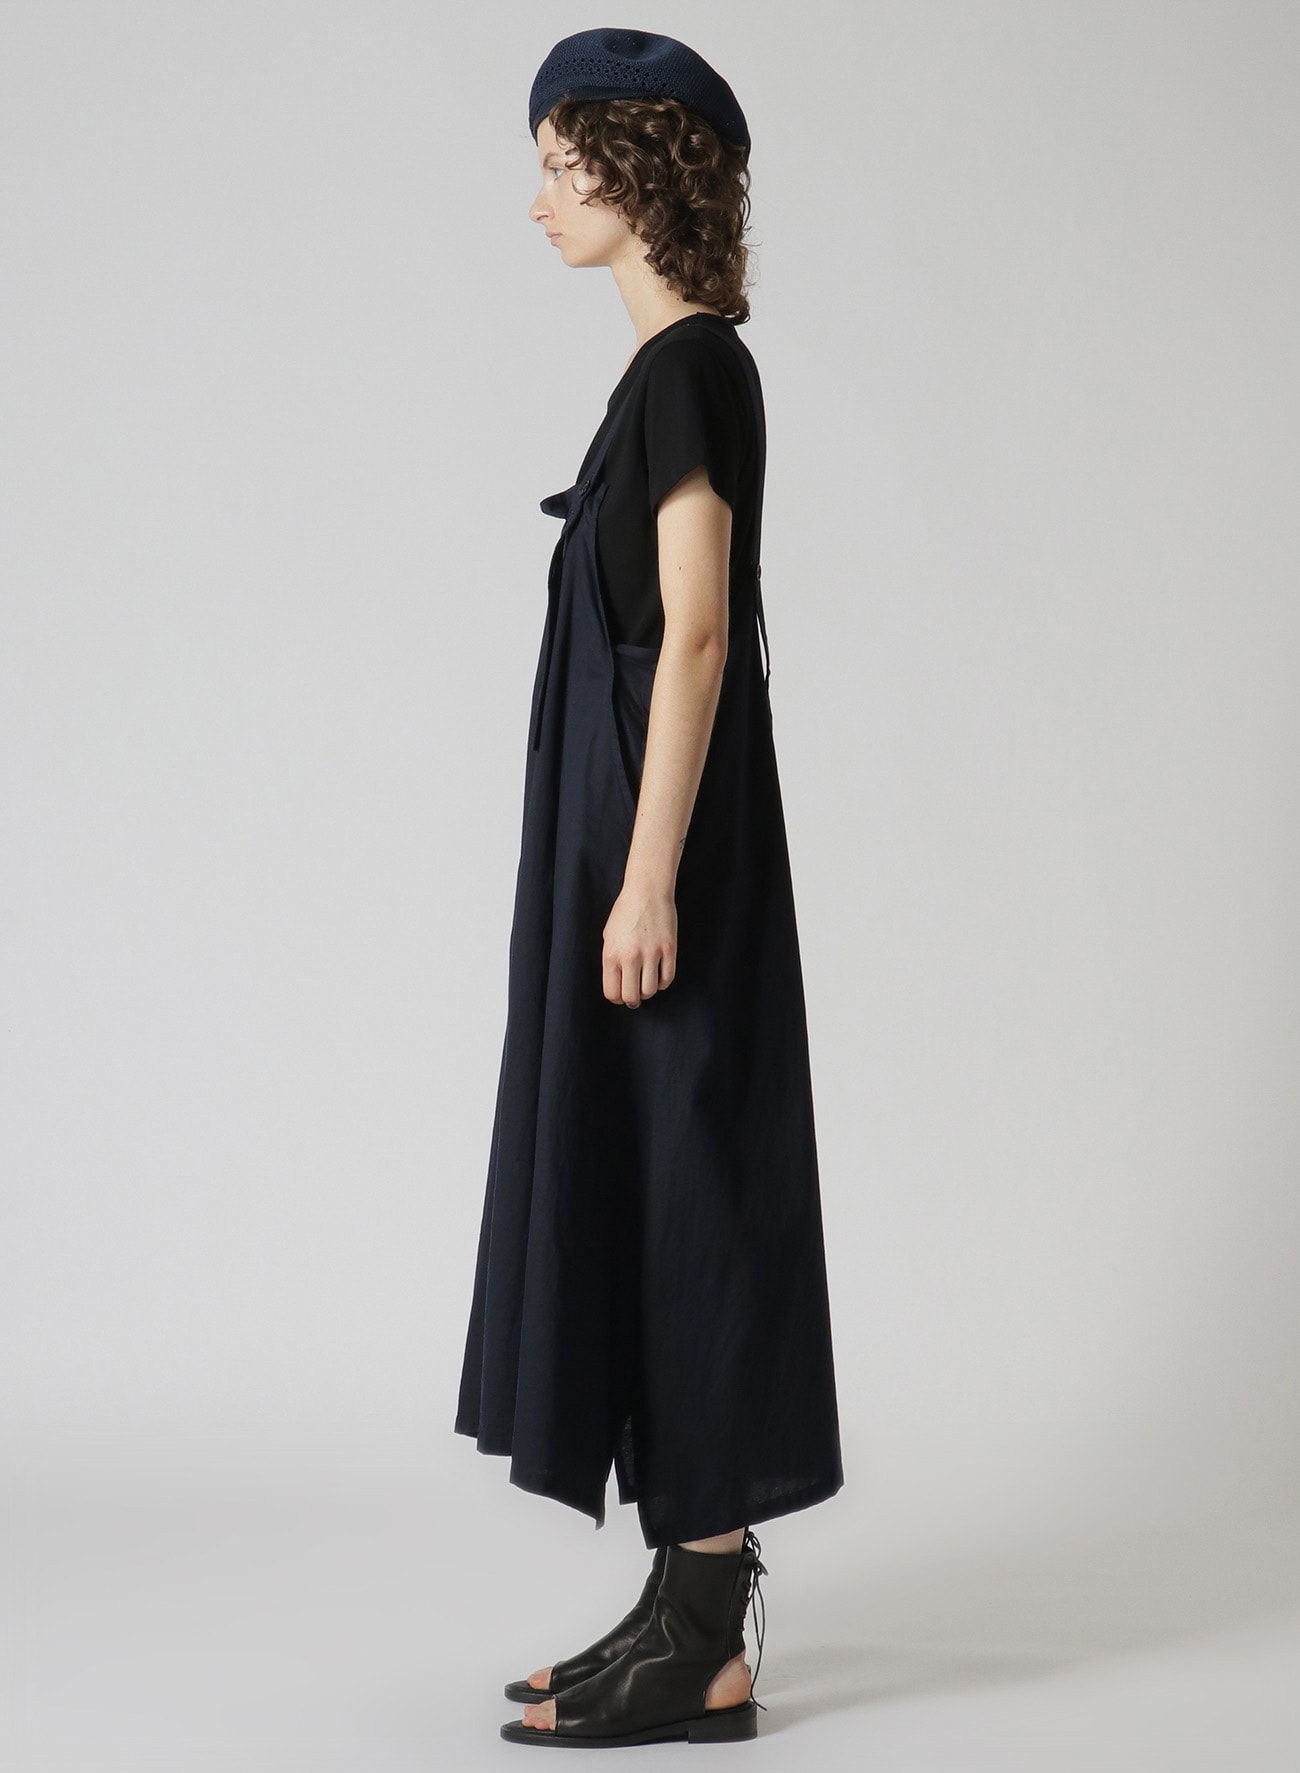 Y's BORN PRODUCT]COTTON THIN TWILL FRONT TUCK SHOULDER STRAP DRESS 